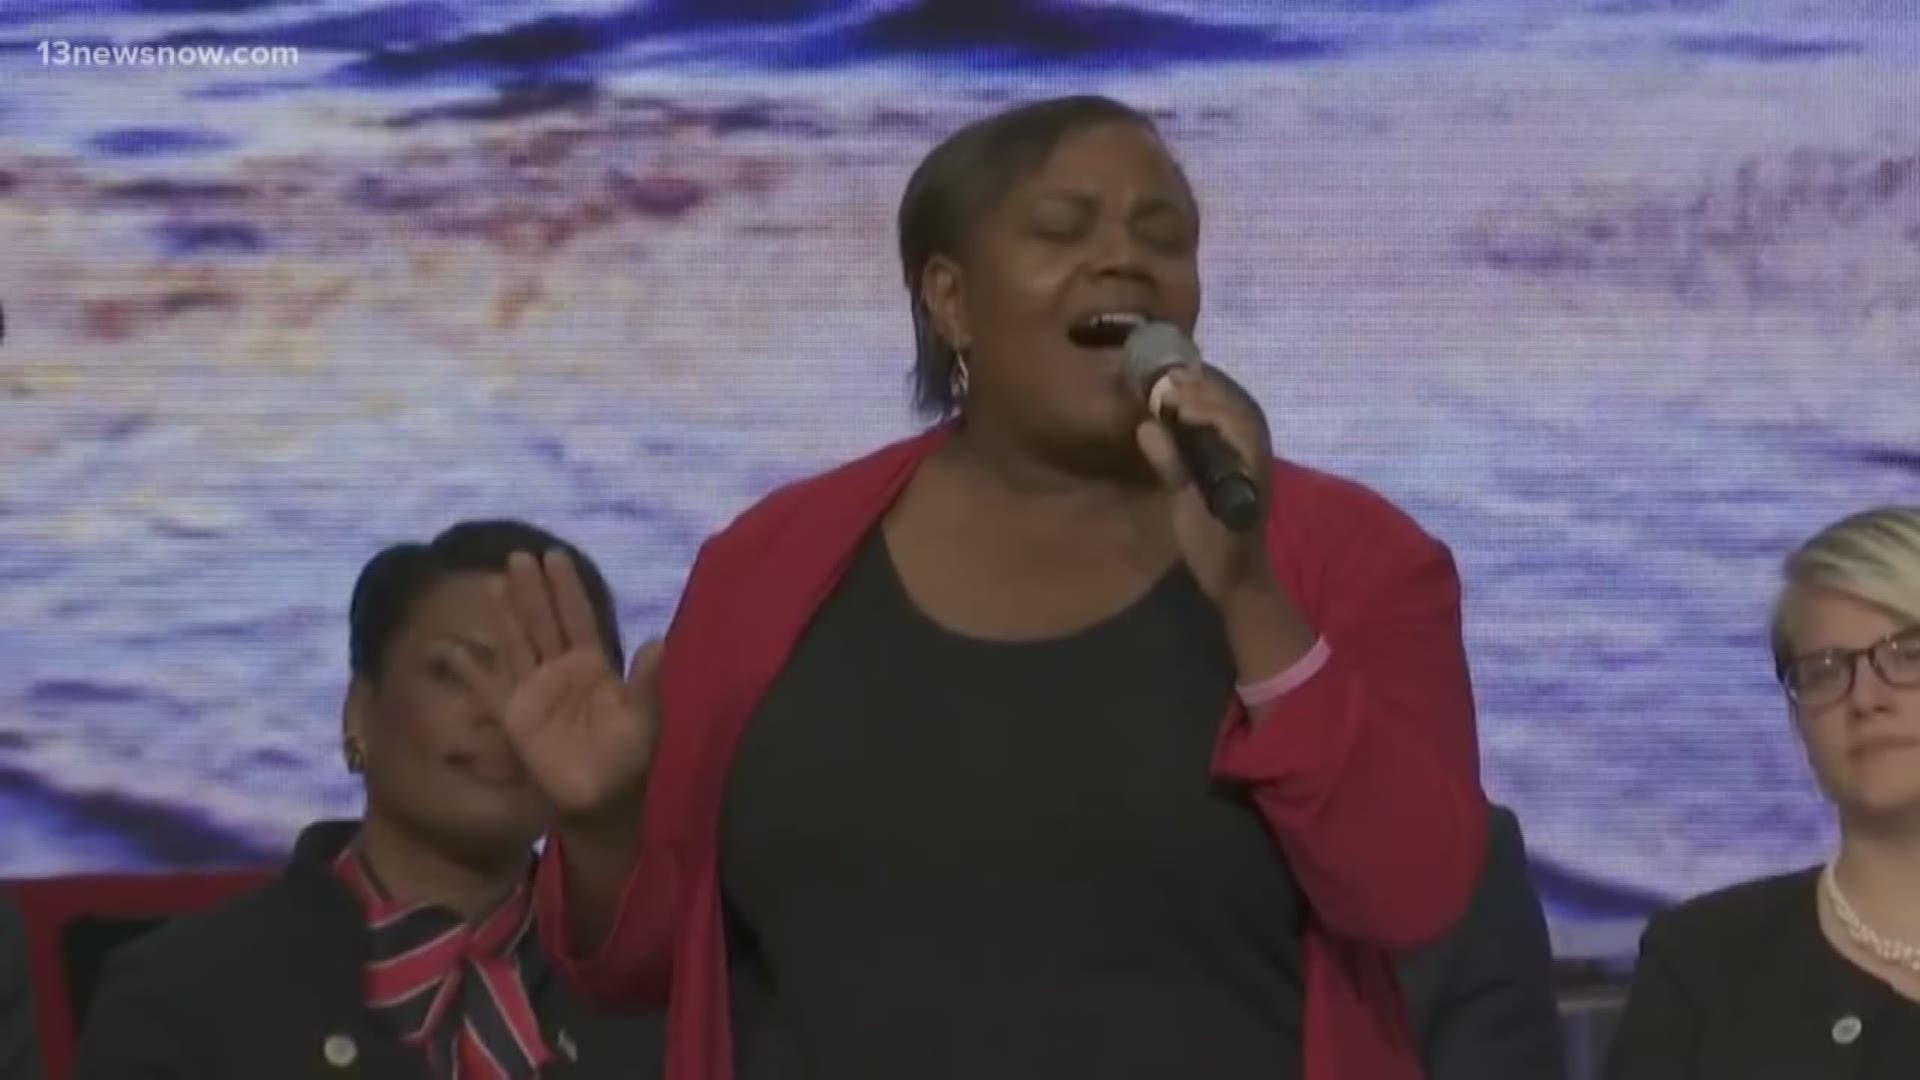 Pamela Tanner's singing was a blessing to so many at the Rock Church's memorial service for the Virginia Beach mass shooting victims. Through music, she moved people in a mysterious way toward a more hopeful tomorrow.